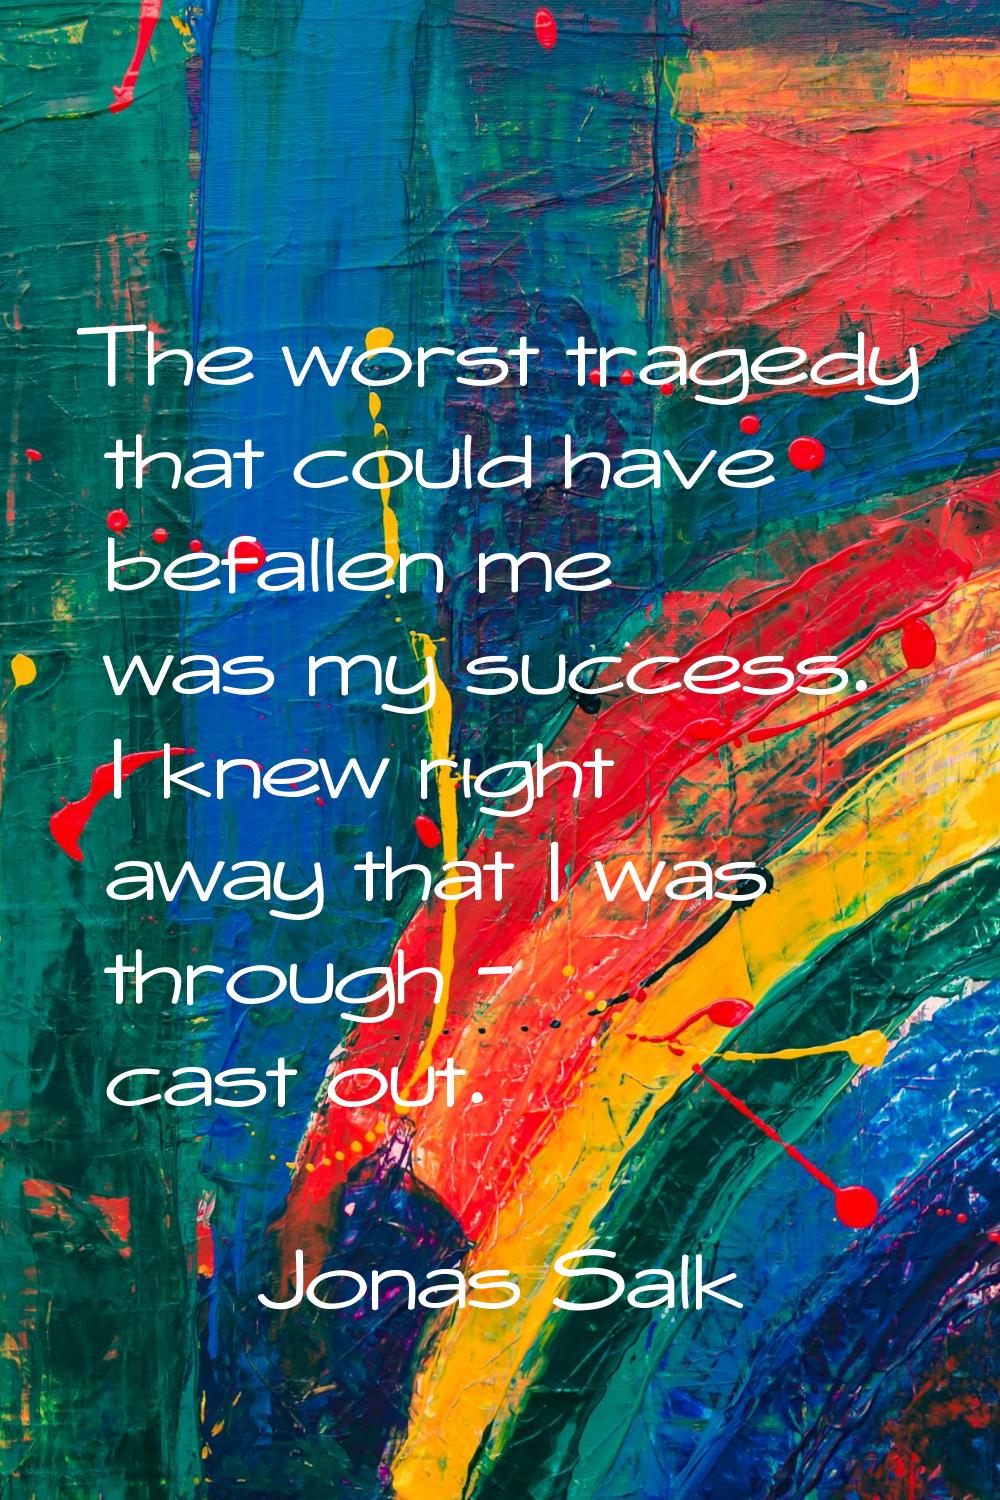 The worst tragedy that could have befallen me was my success. I knew right away that I was through 